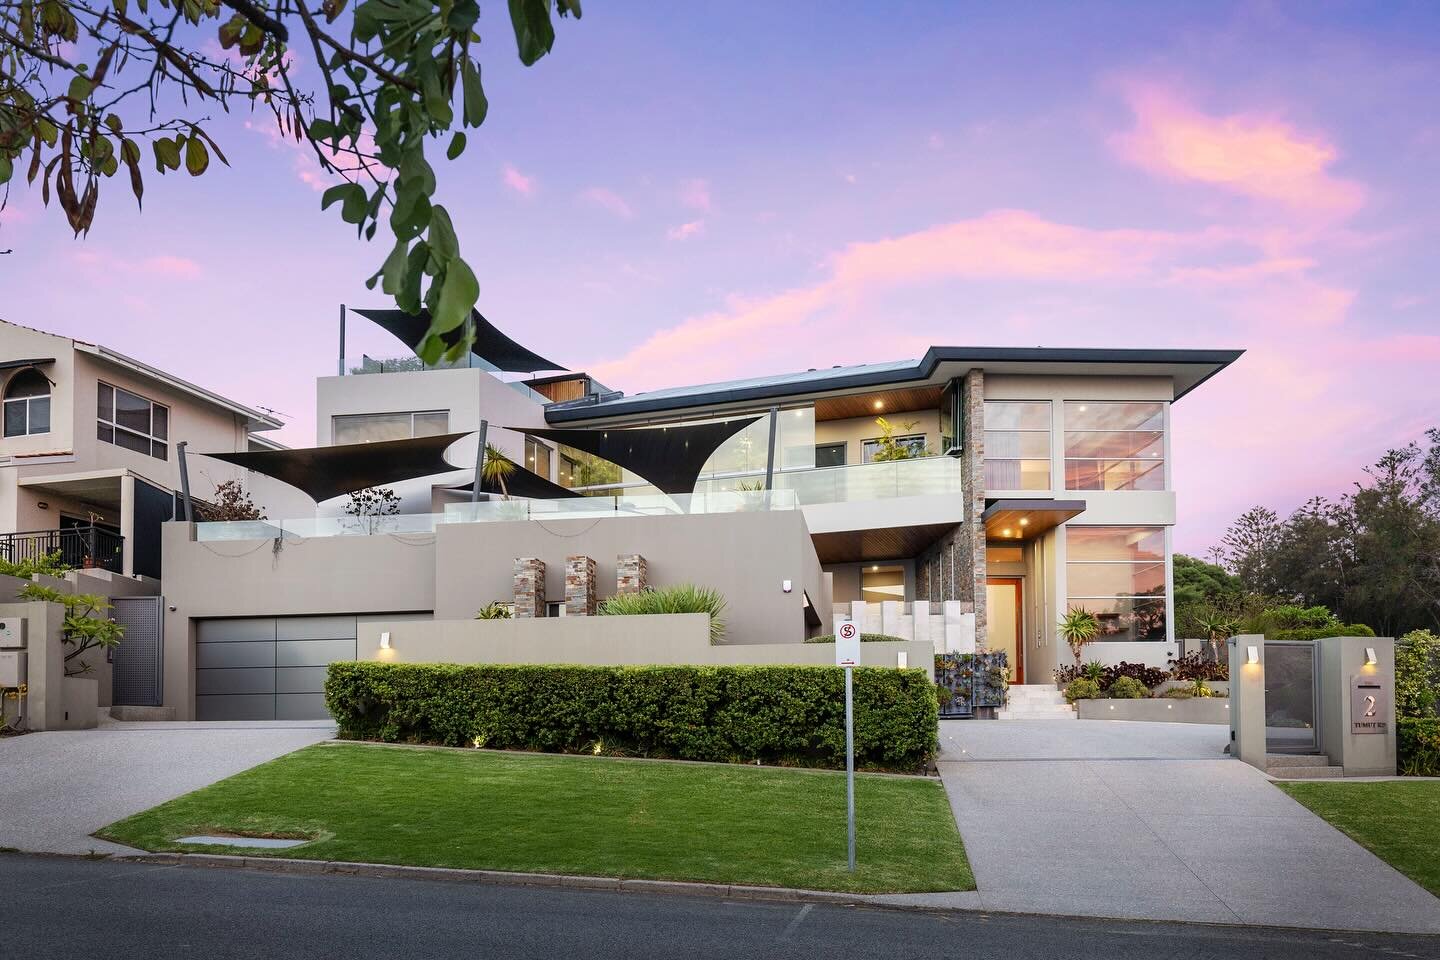 PROPERTY SHOWCASE 🌟 2 Tumut Road City Beach. 

With too many features to mention, here is this spectacular property at a glance;

Built circa 2013, this striking residence is positioned on a naturally elevated 832m2 green titled land holding with ov